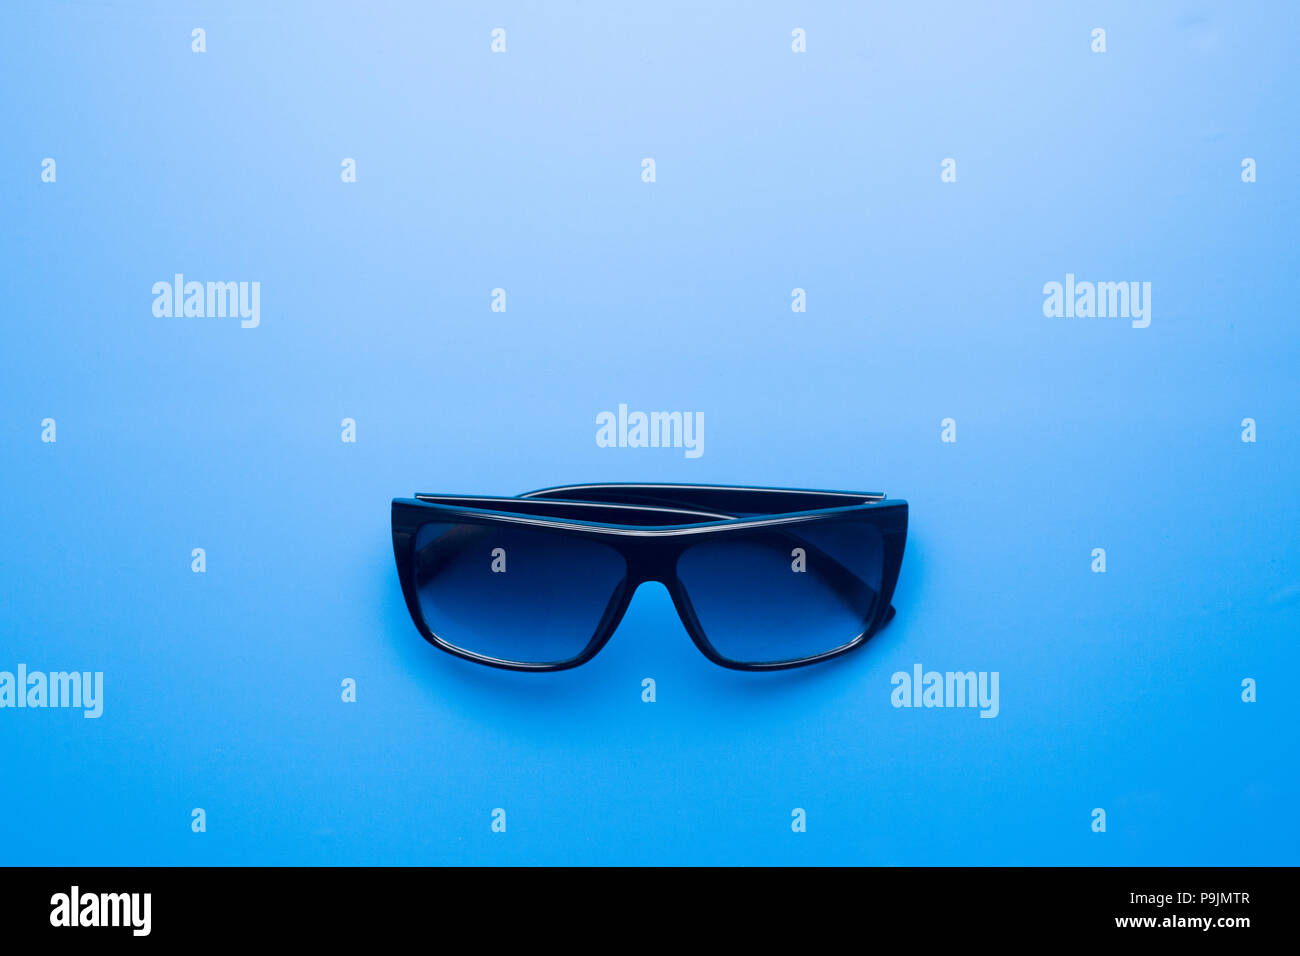 Sunglass On White Background Stock Photo - Download Image Now